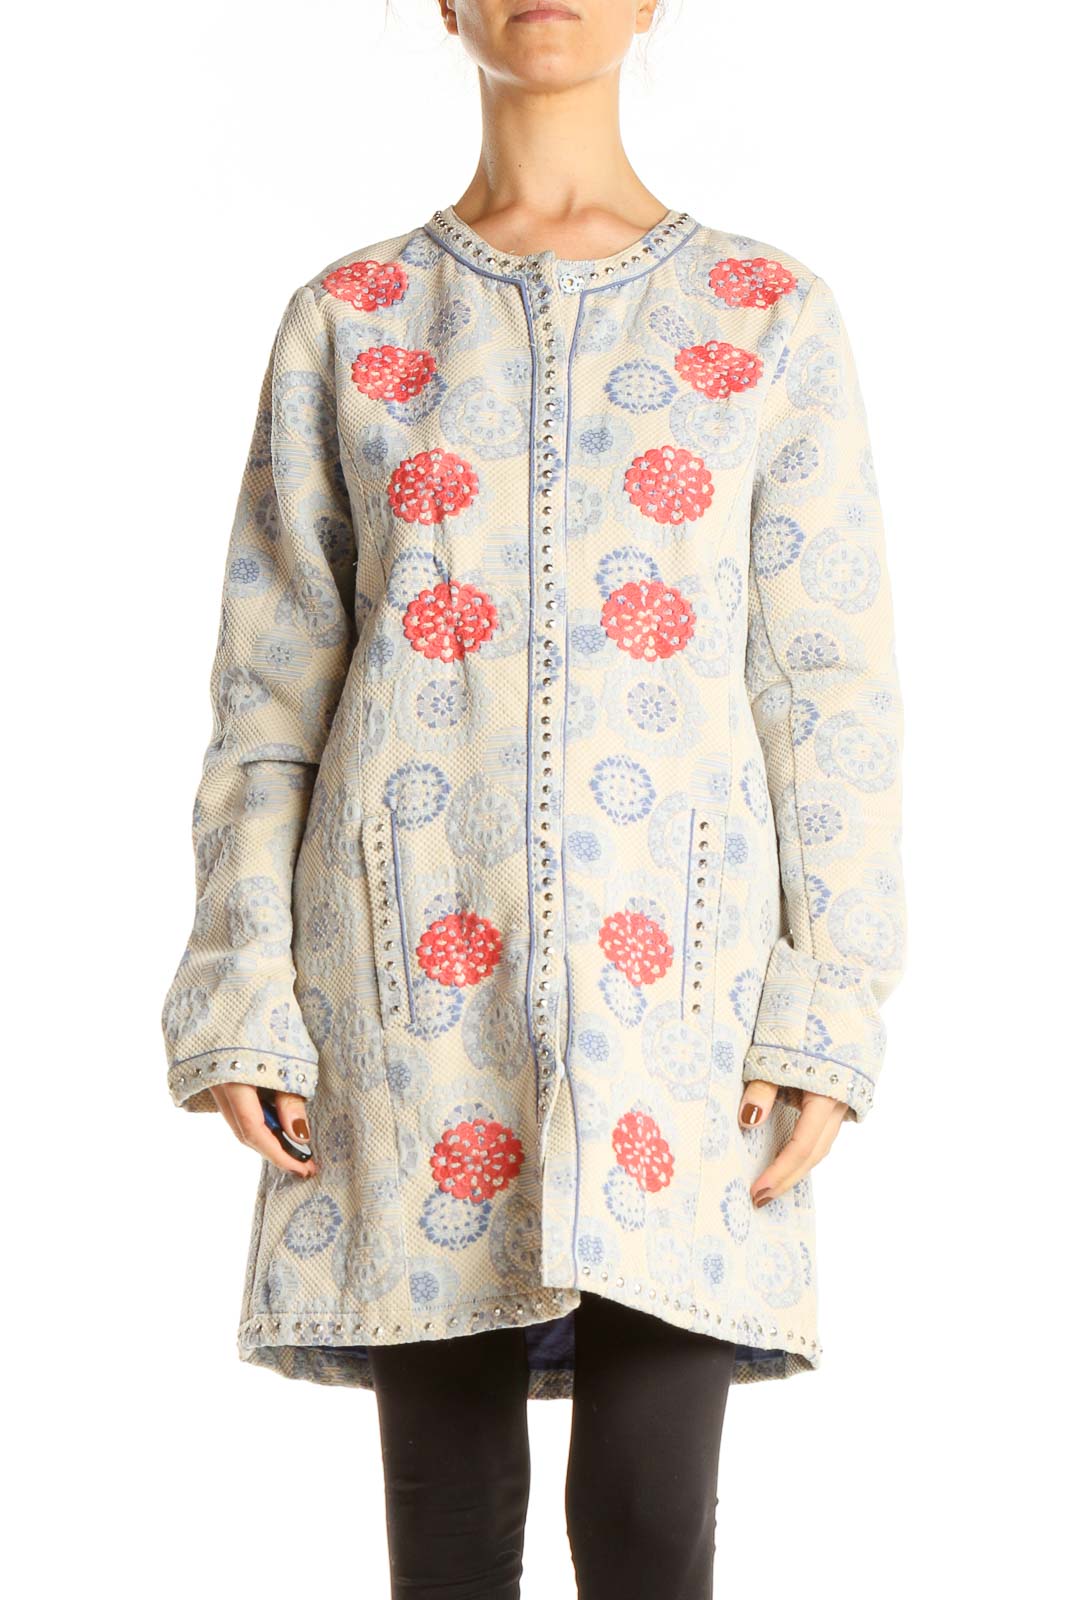 Beige Embroidered Retro Jacket Front